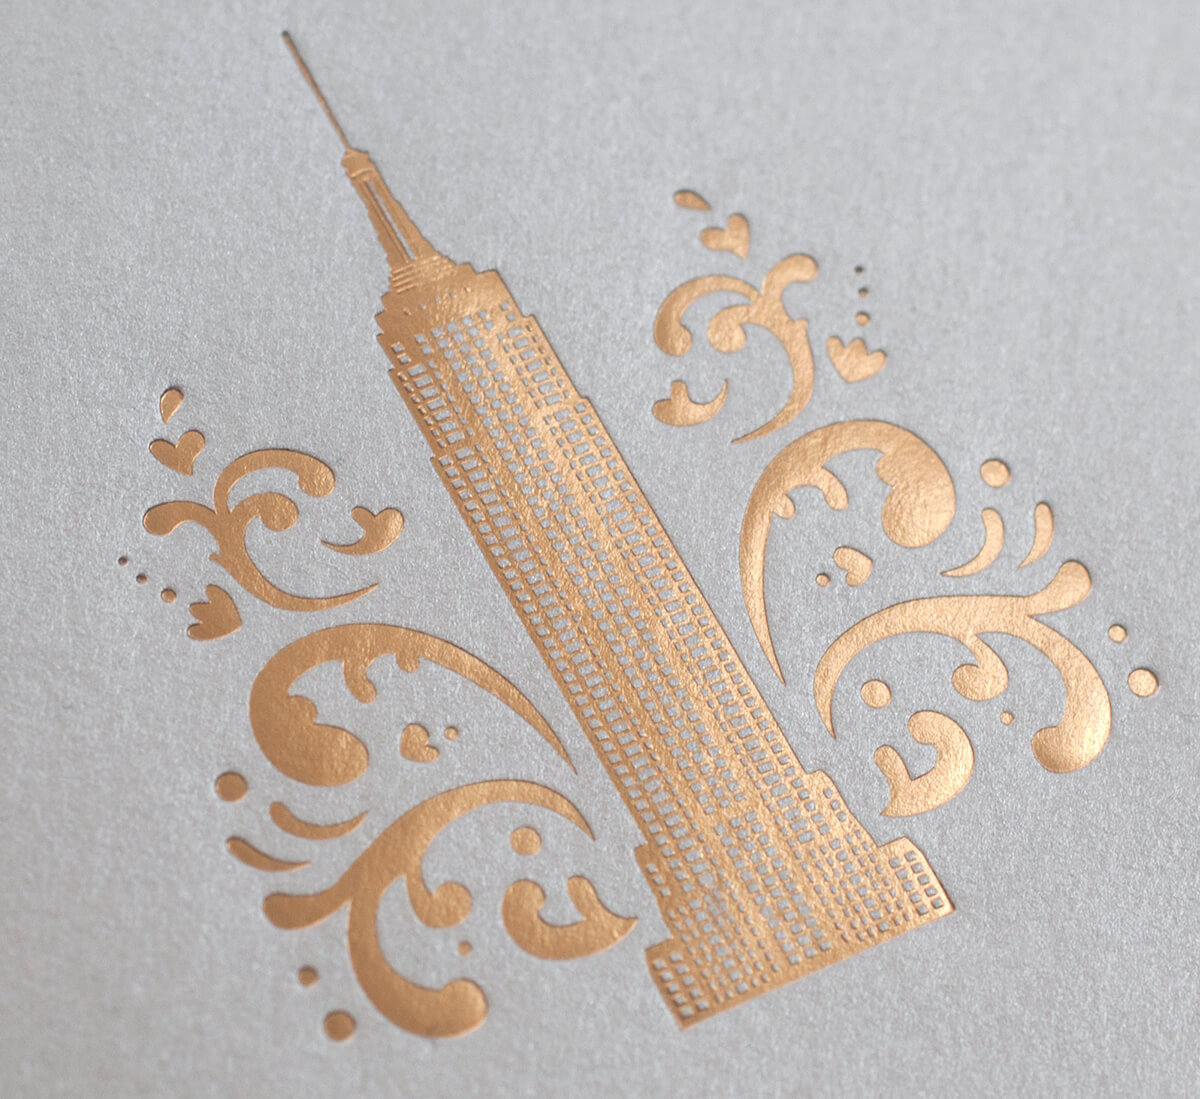 Gold foil Empire State Building